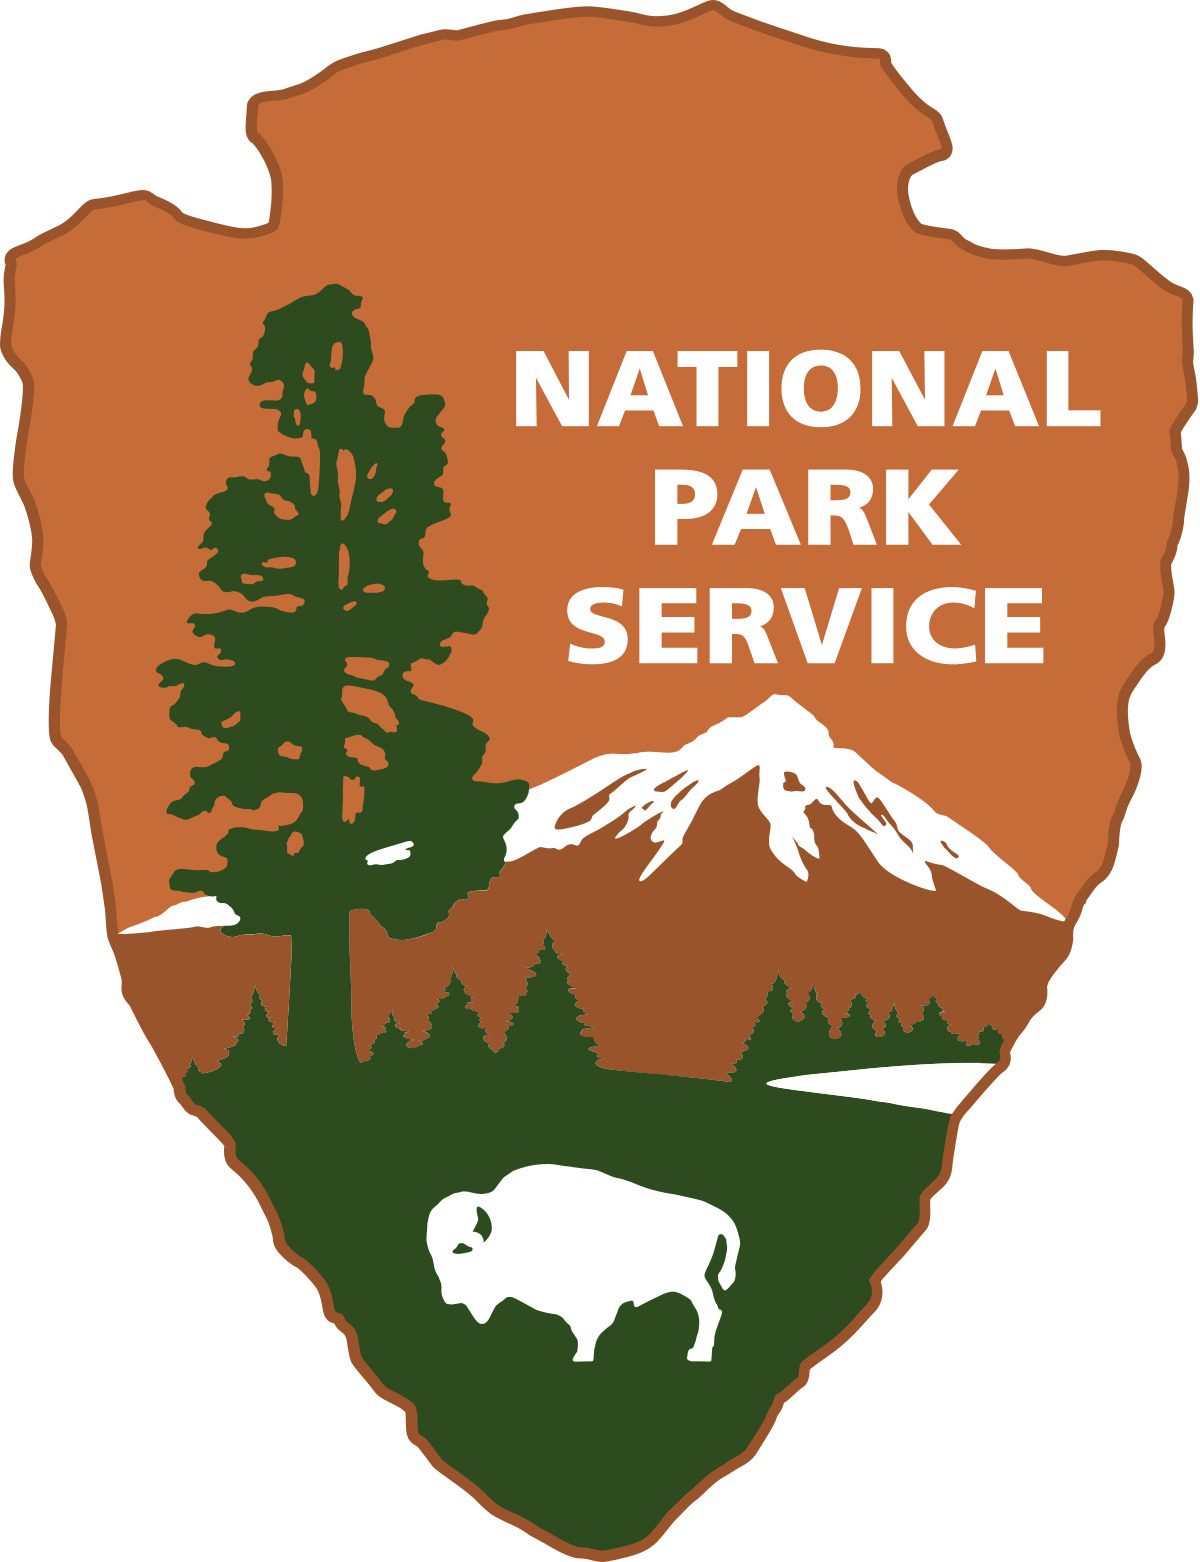 National Park Service Decals (Set of 2) NPS National Parks Stickers Travel USA